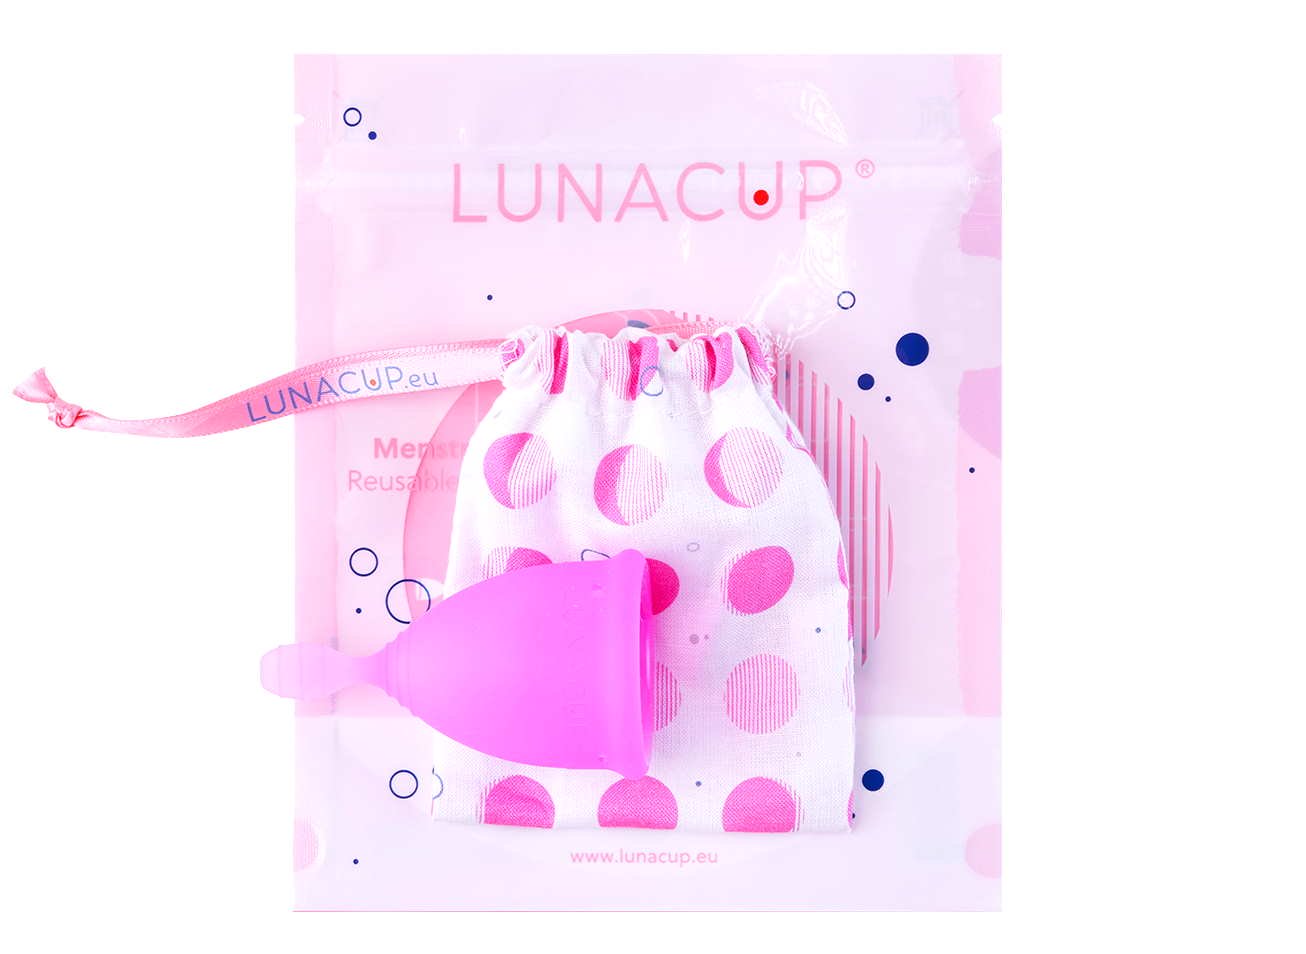 LUNACUP menstrual cup what is in the Box